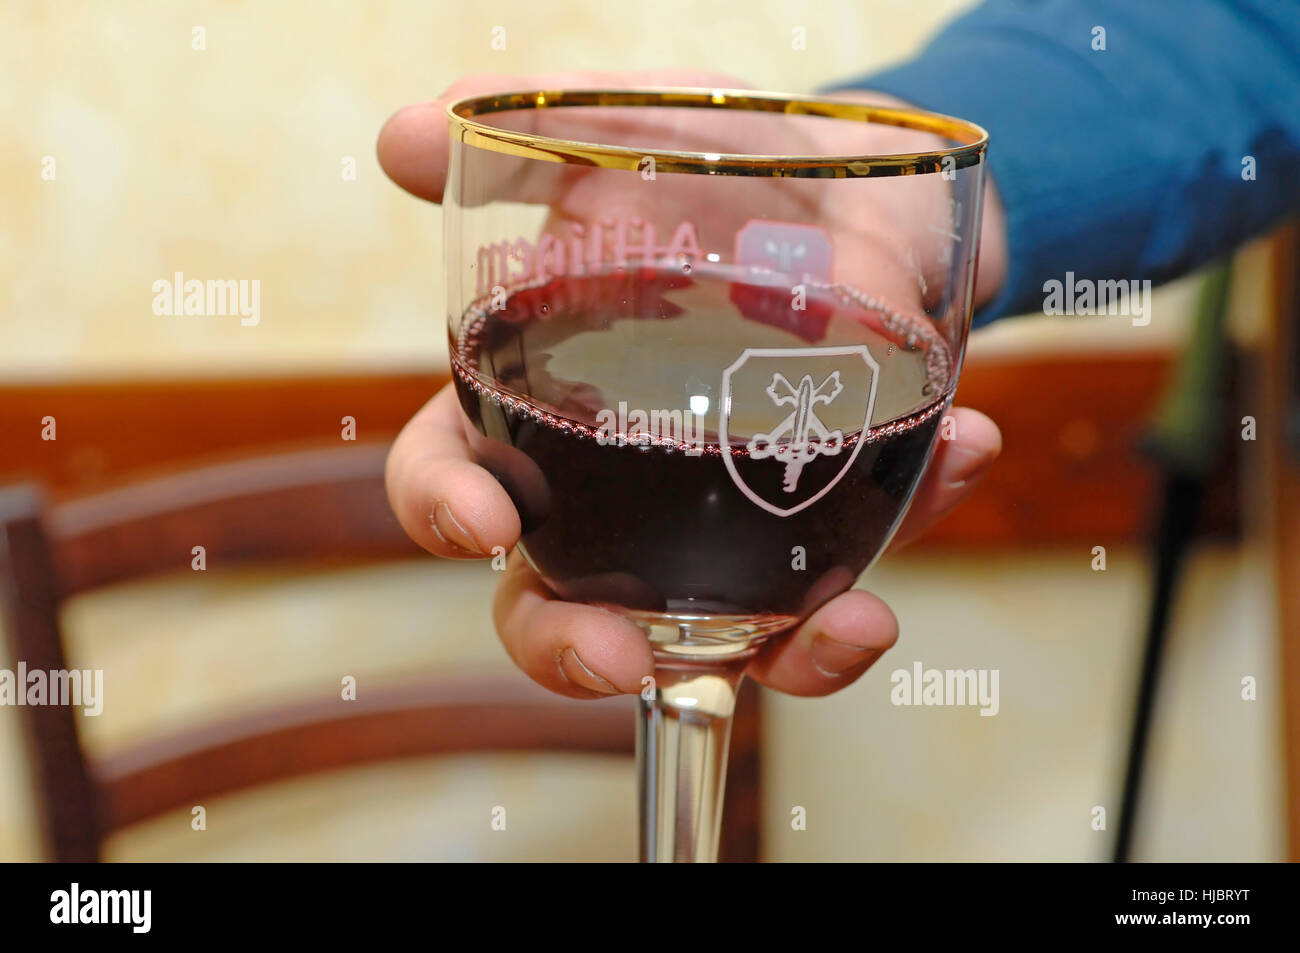 A glass of red wine, Basilicata, Italy Stock Photo